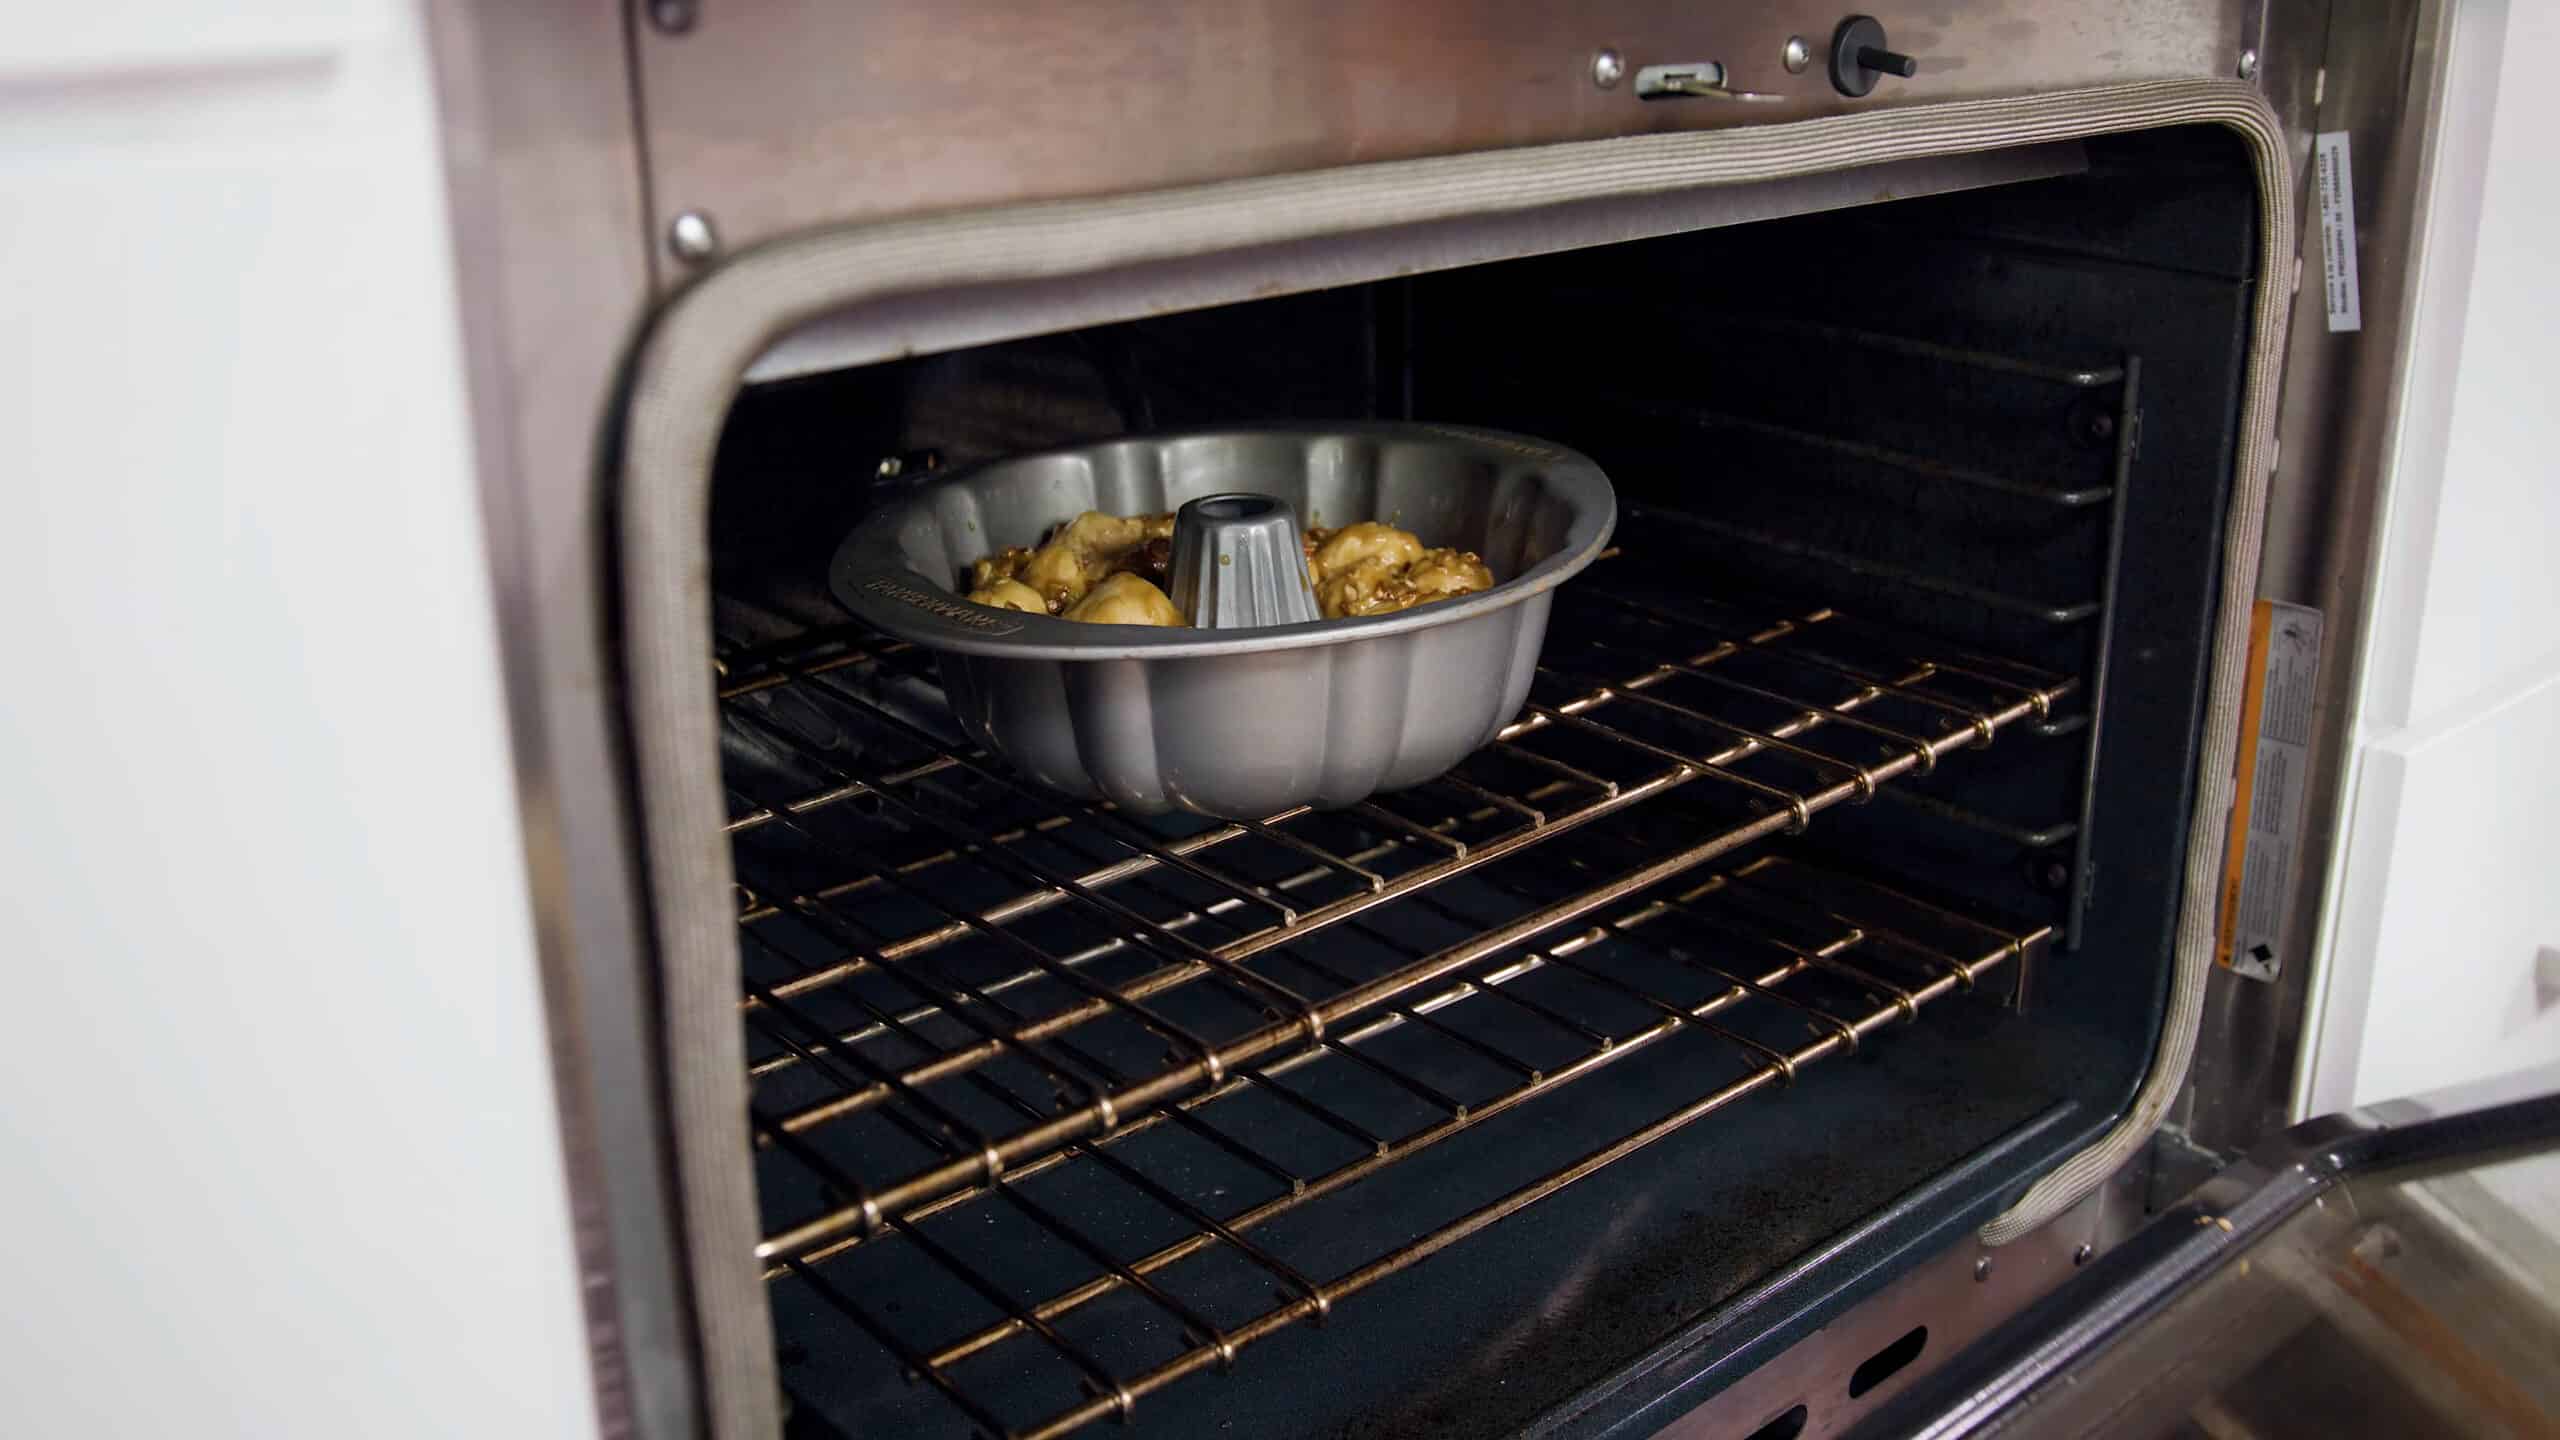 Angled view of an open oven with a metal bundt shaped cake pan filled with risen dough balls covered in pecan caramel sauce sitting on a metal rack in the middle of the oven.